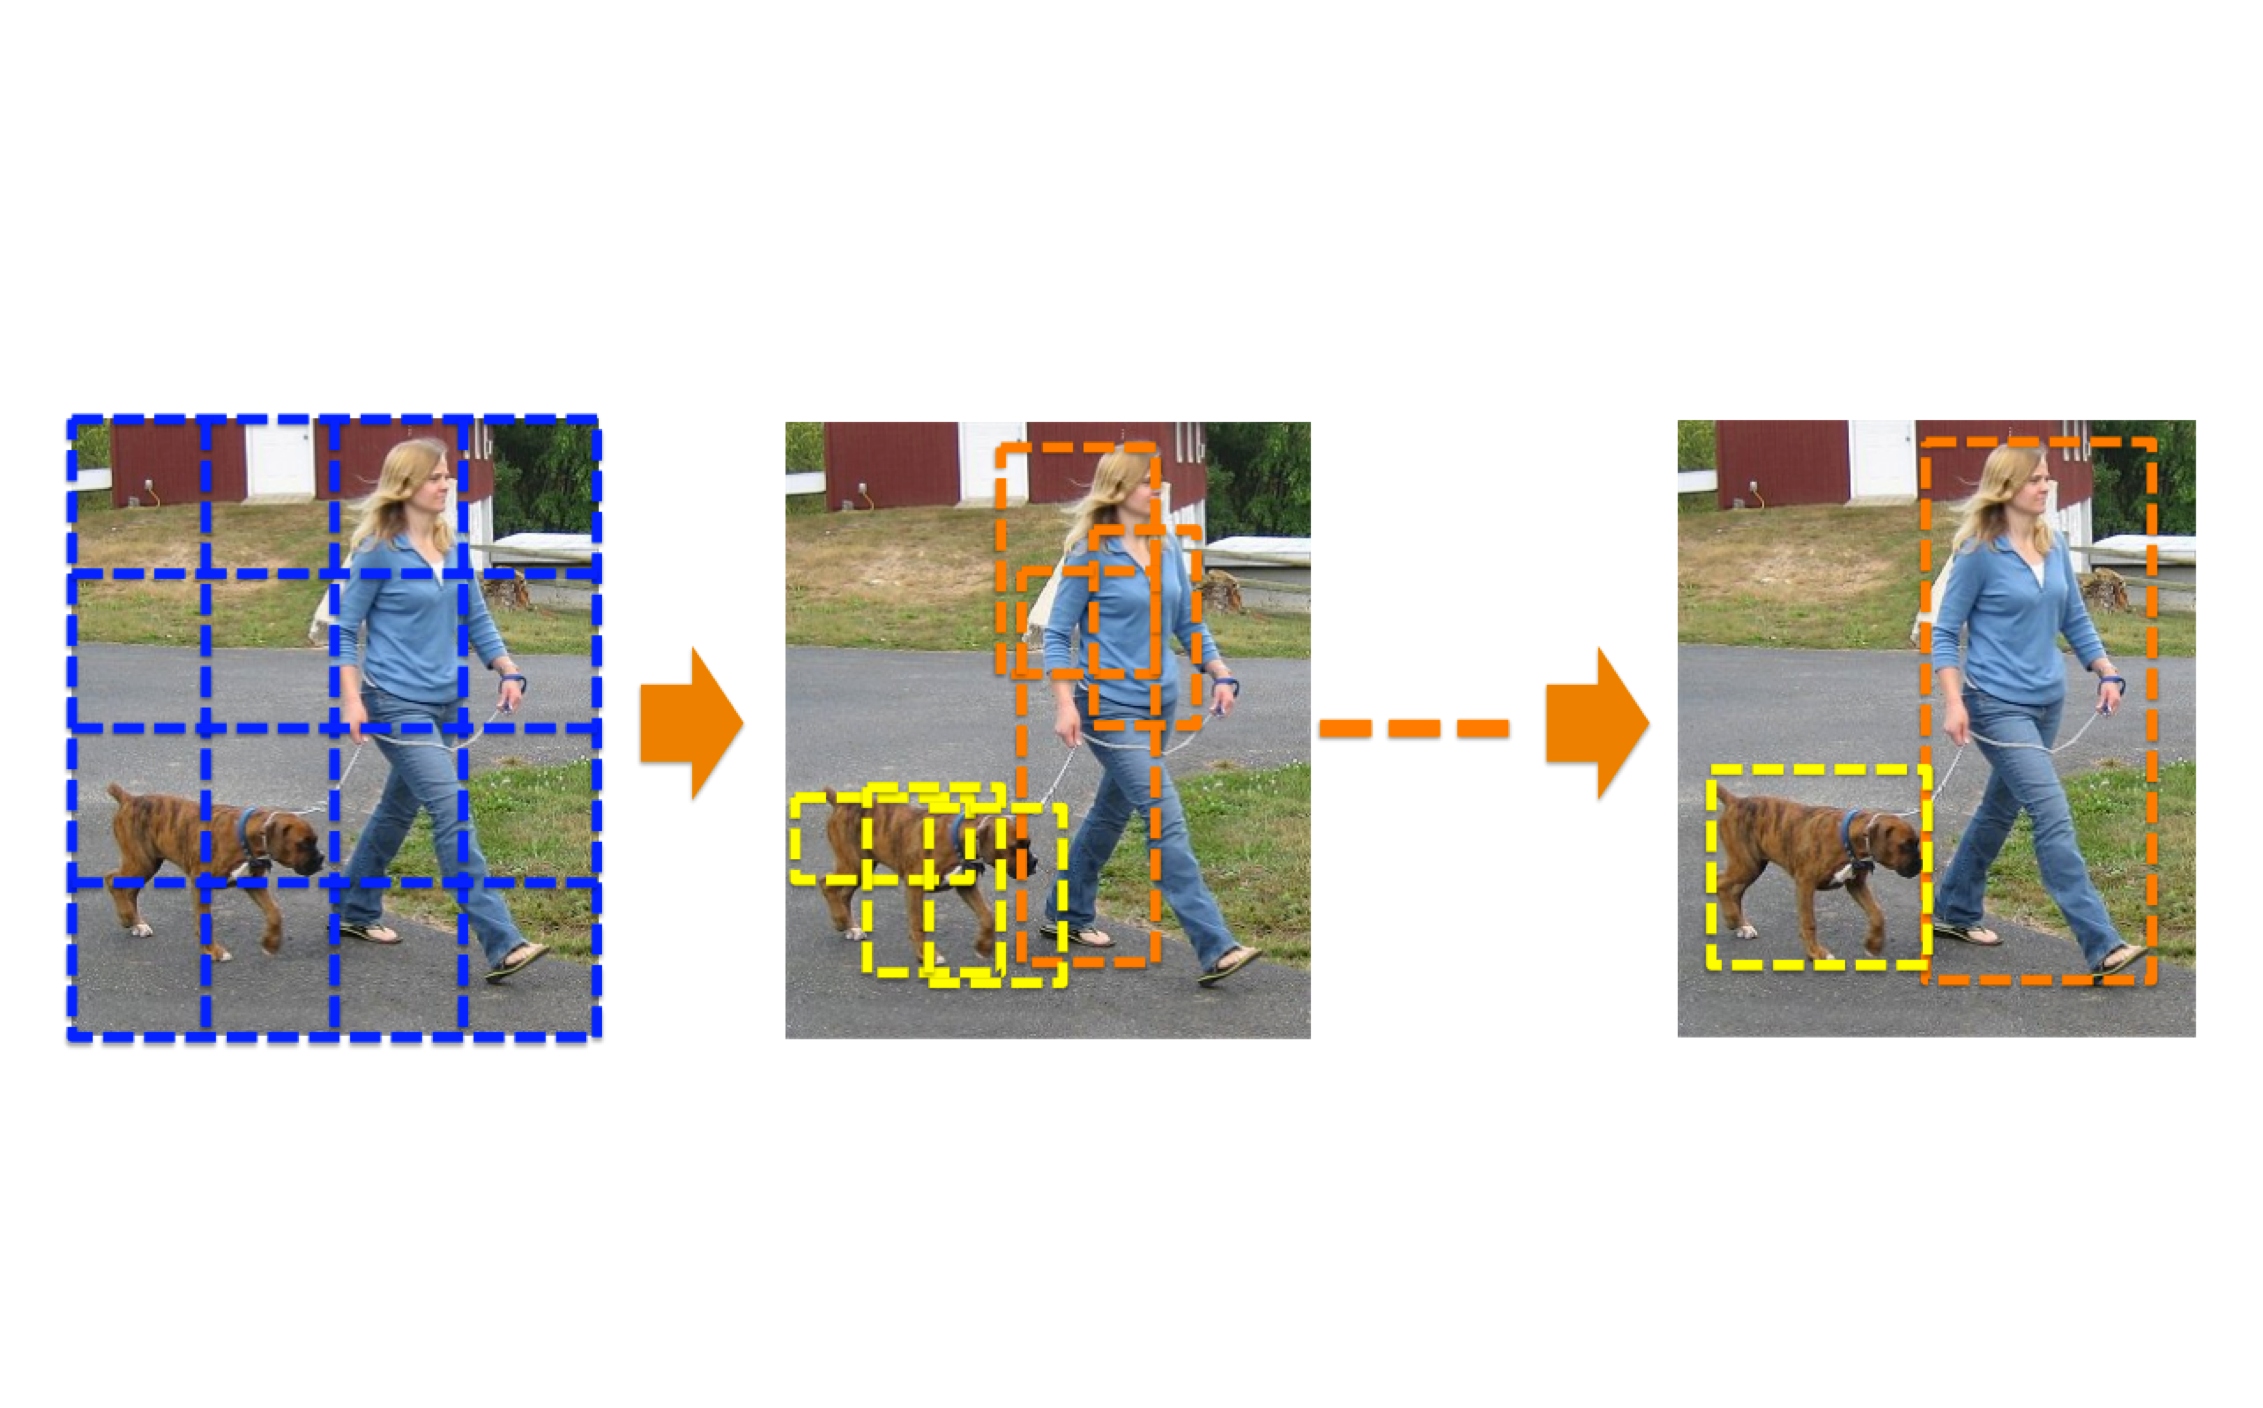 G-CNN: an Iterative Grid Based Object Detector